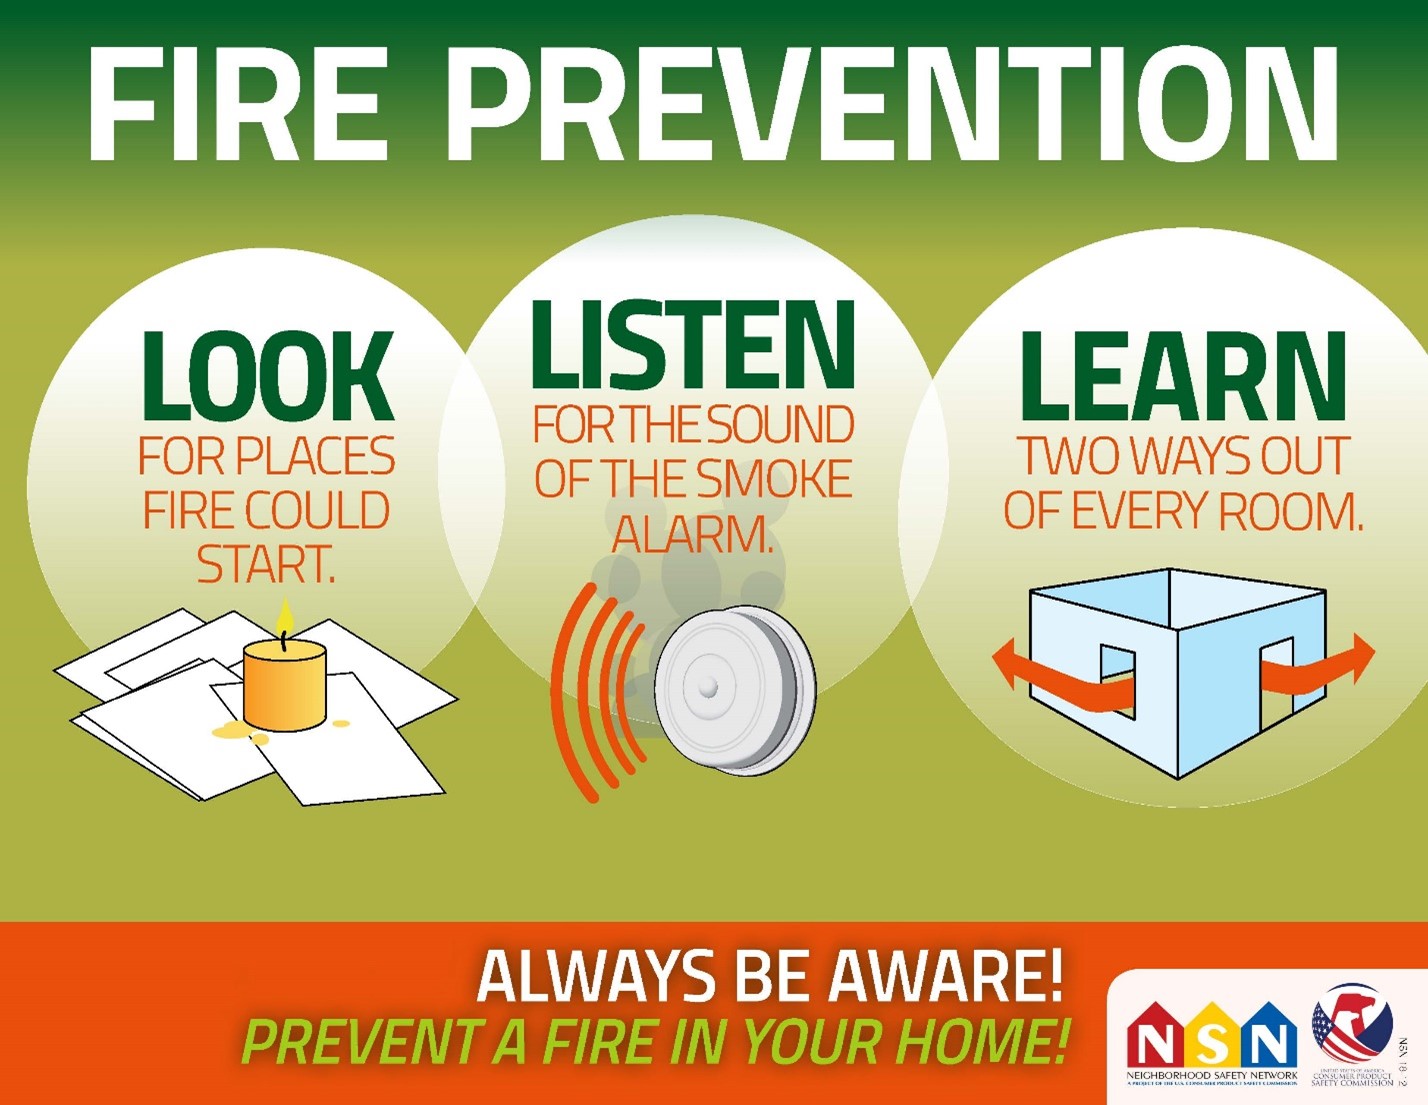 Prevent a fire in your home